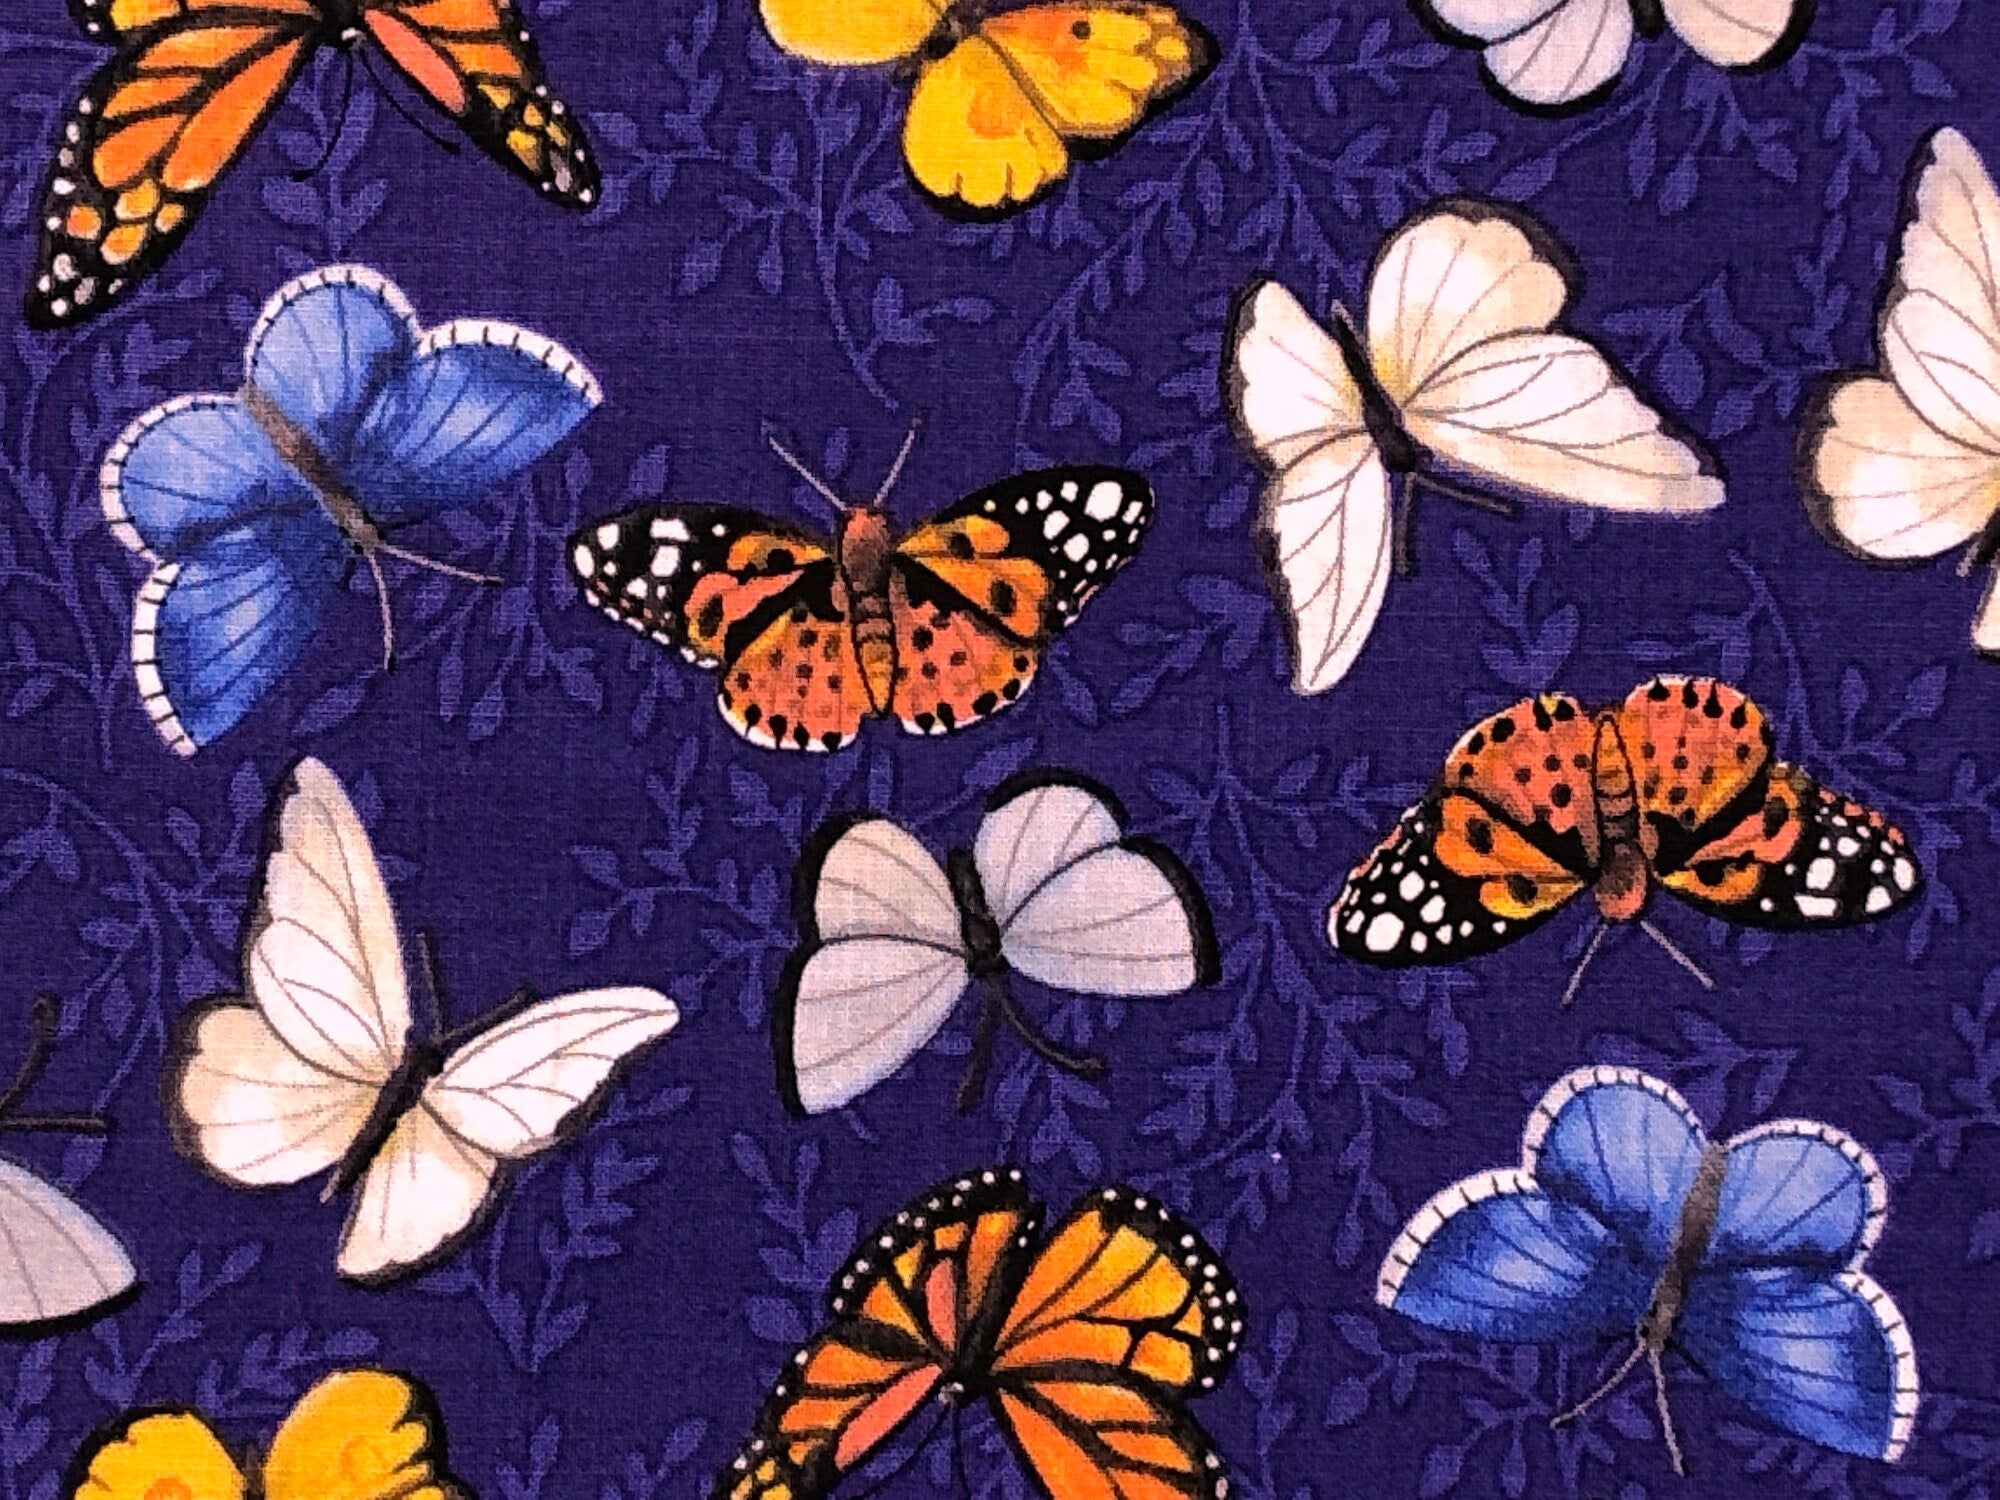 This fabric is called Sunny Fields Butterflies and is covered with white, yellow, orange and blue butterflies.